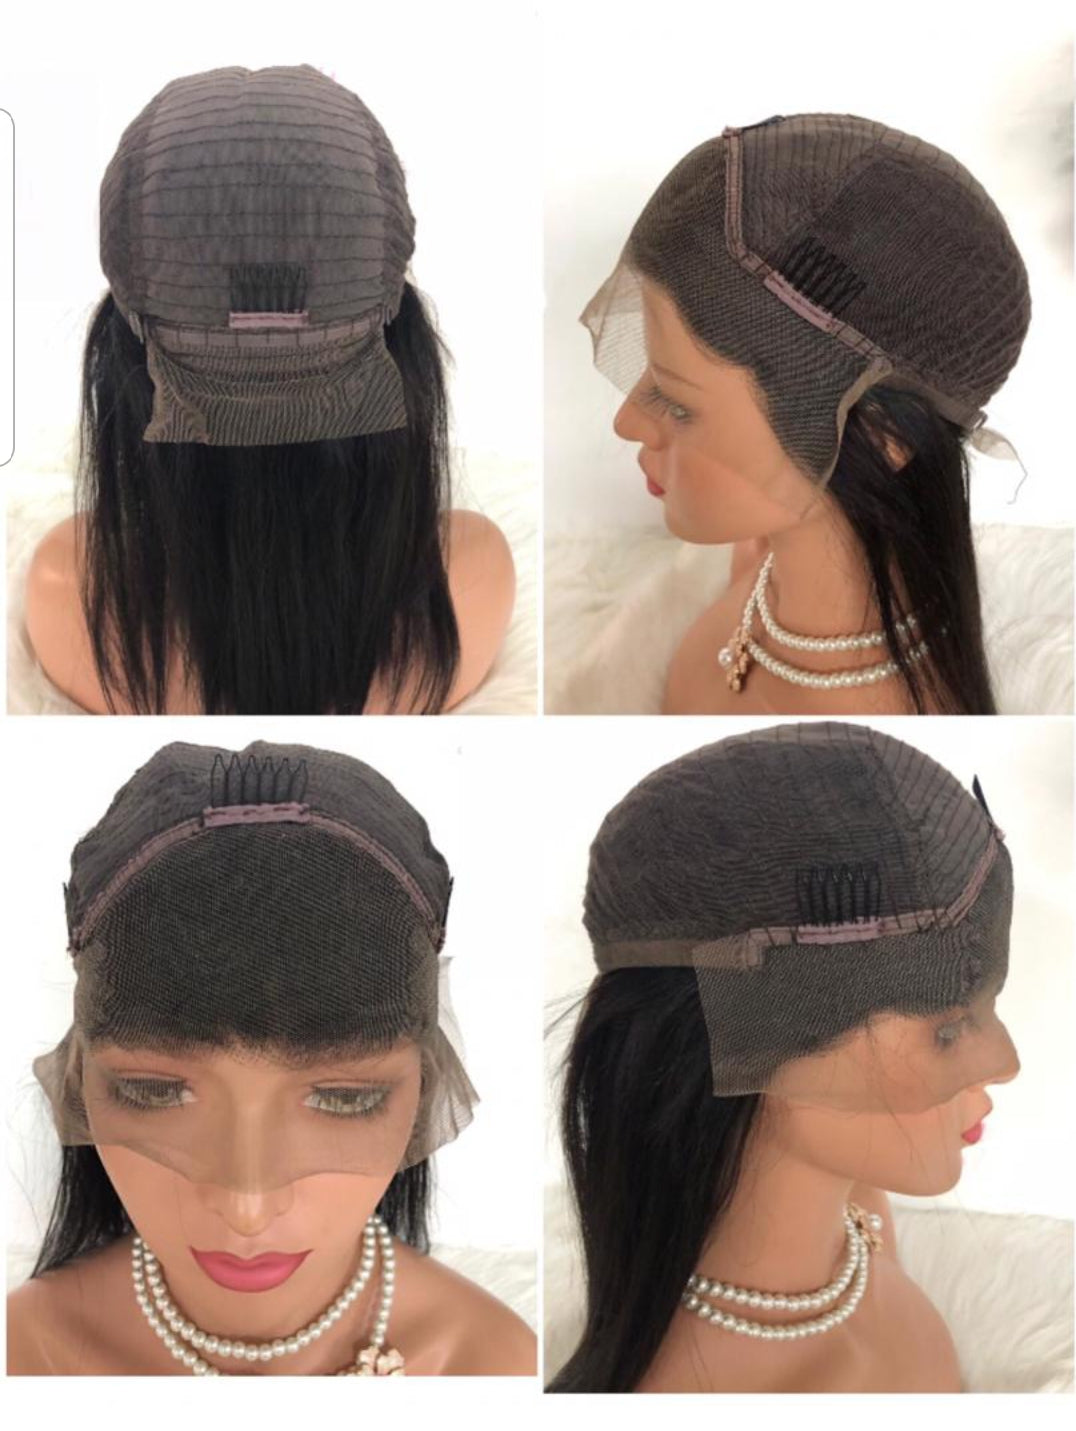 Pre-Made Lace Frontal Units